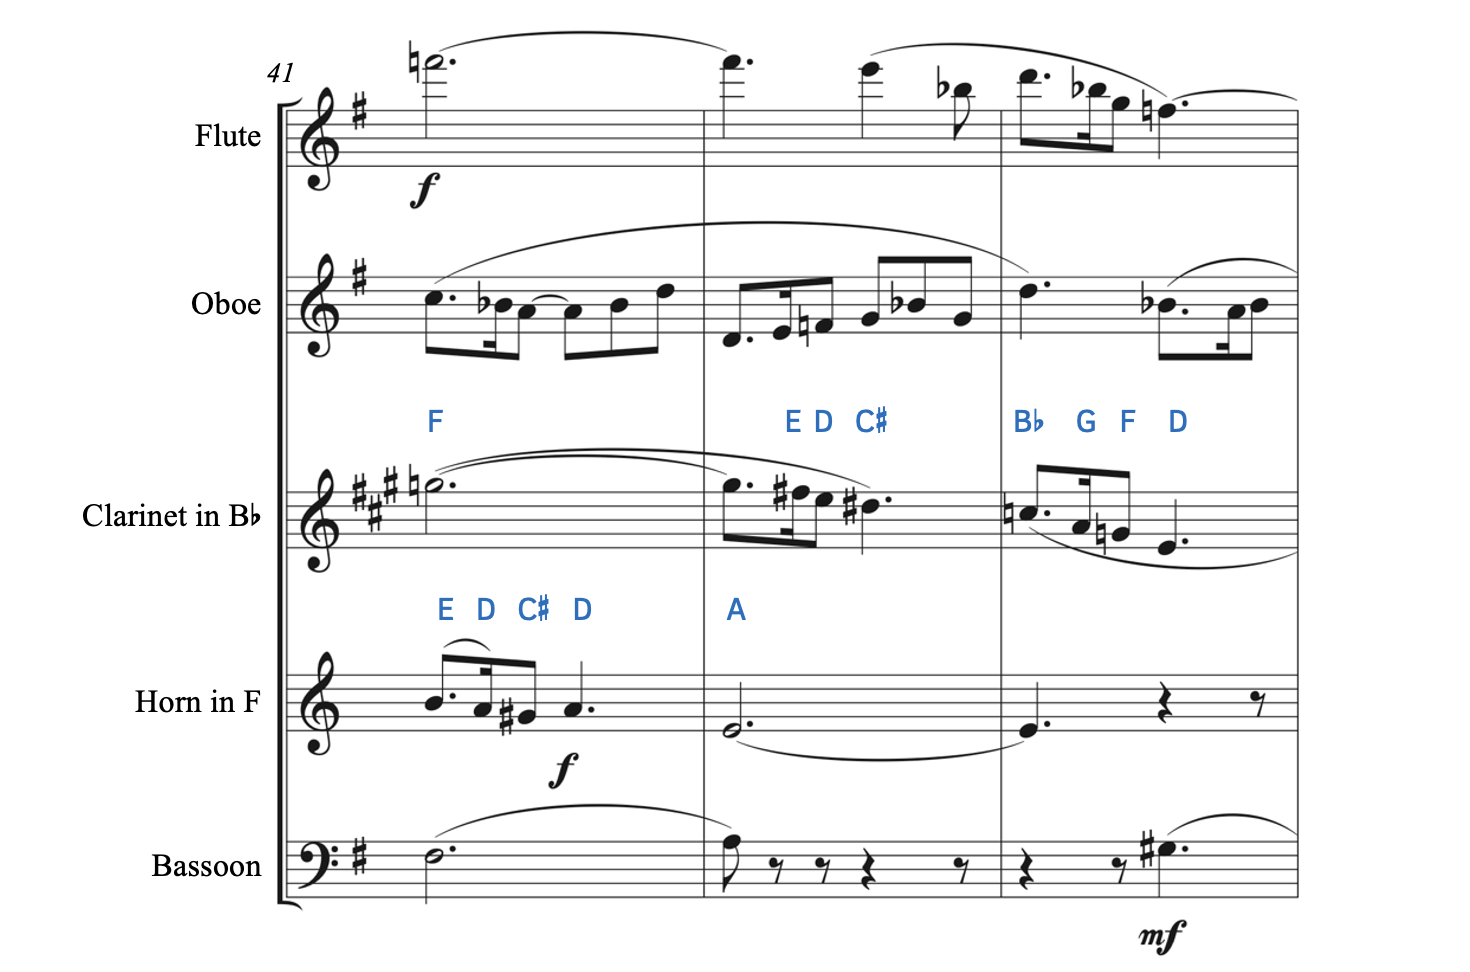 Excerpt from Beach, Pastorale Wind Quintet shows the concert pitches for the clarinet in B-flat and the horn in F.